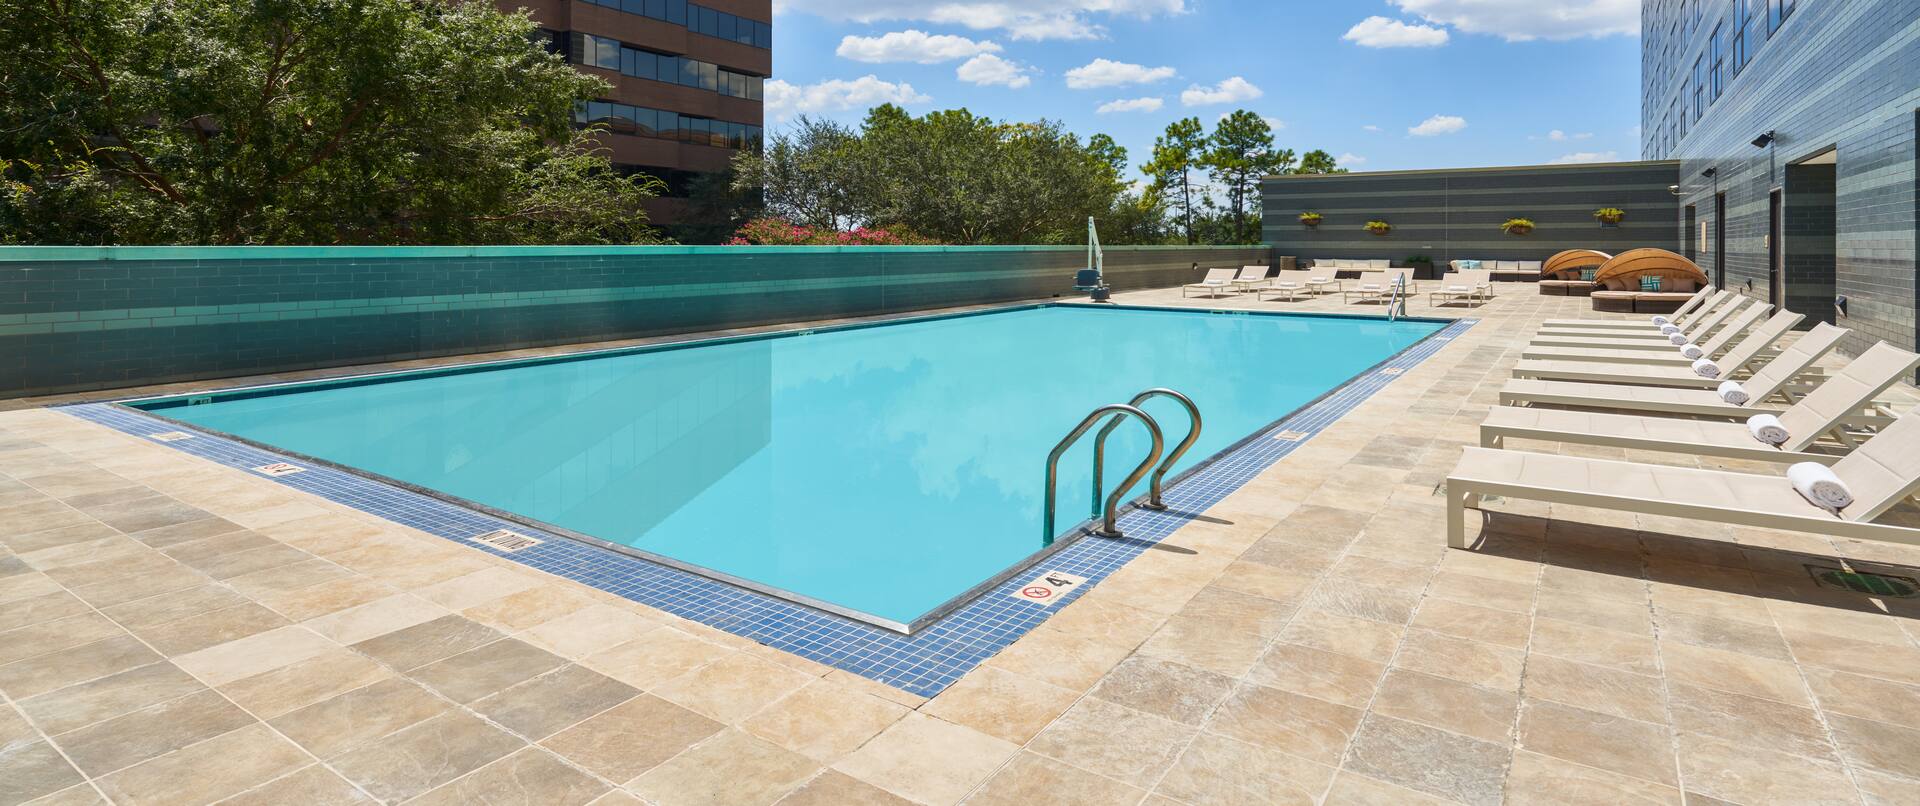 Outdoor pool area with loungers